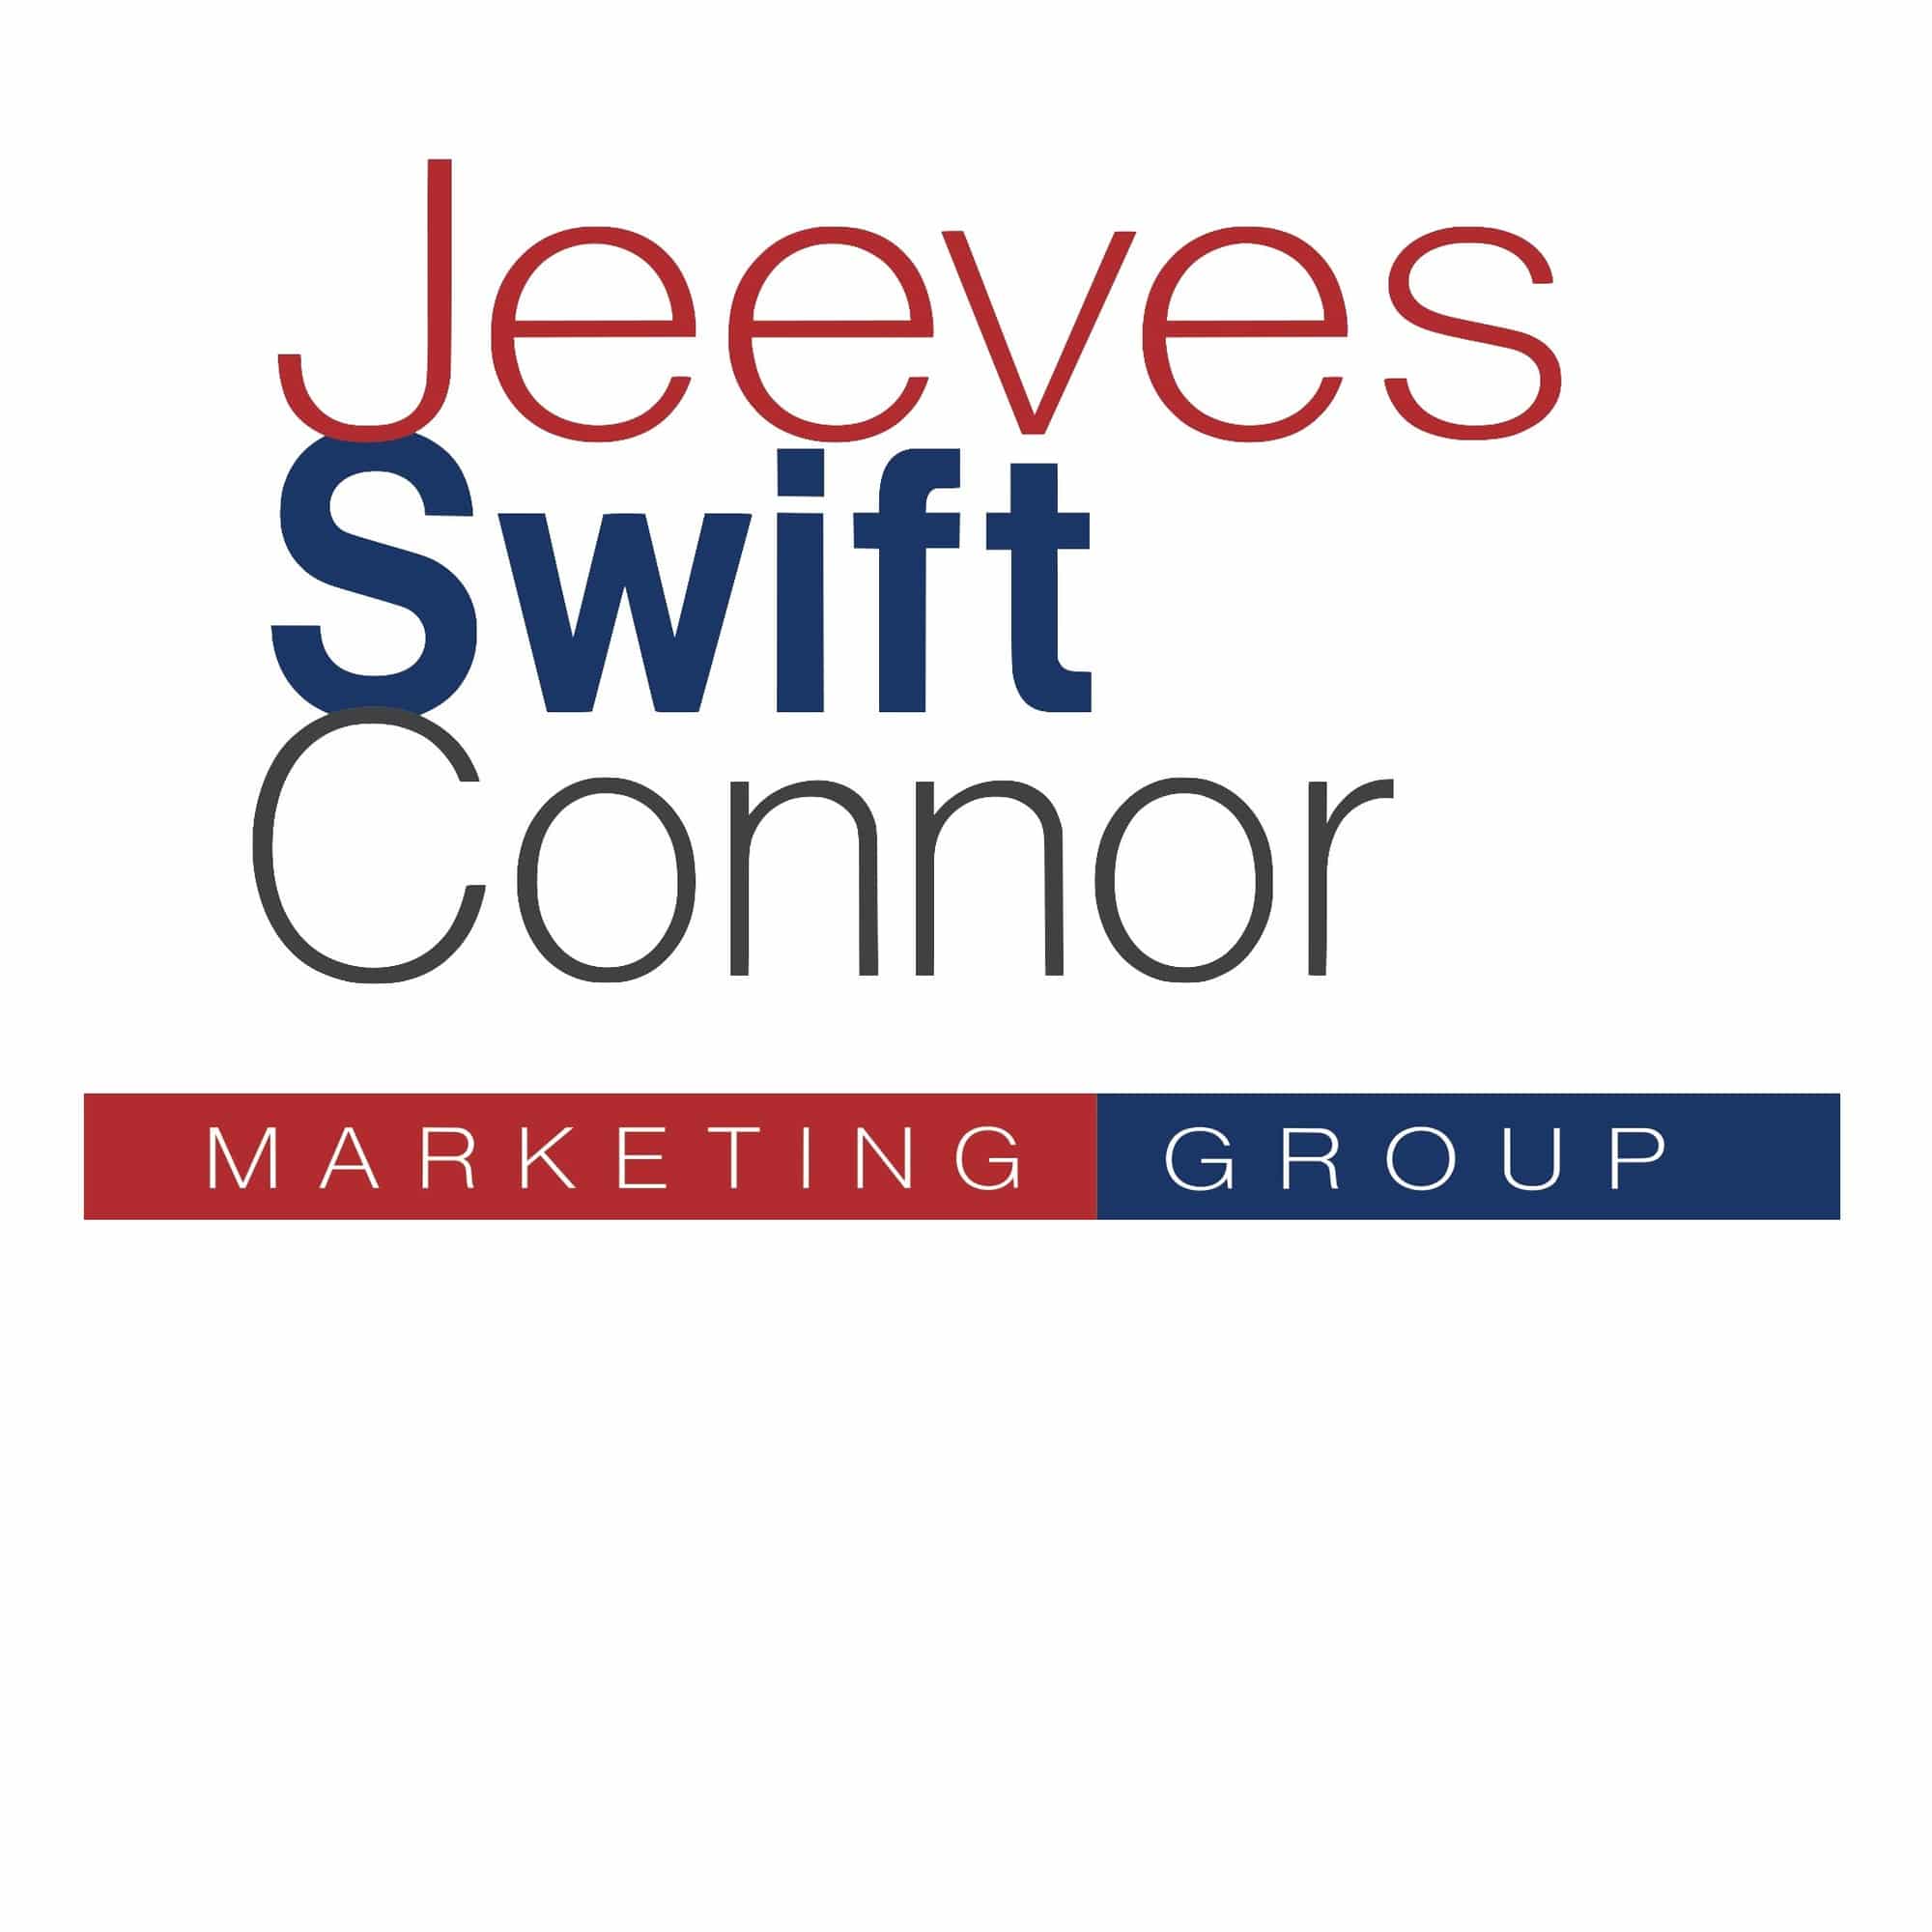 <p><span style="color: rgb(38, 59, 76);" class="ql-size-small">Jeeves - Swift – Connor</span></p> logo